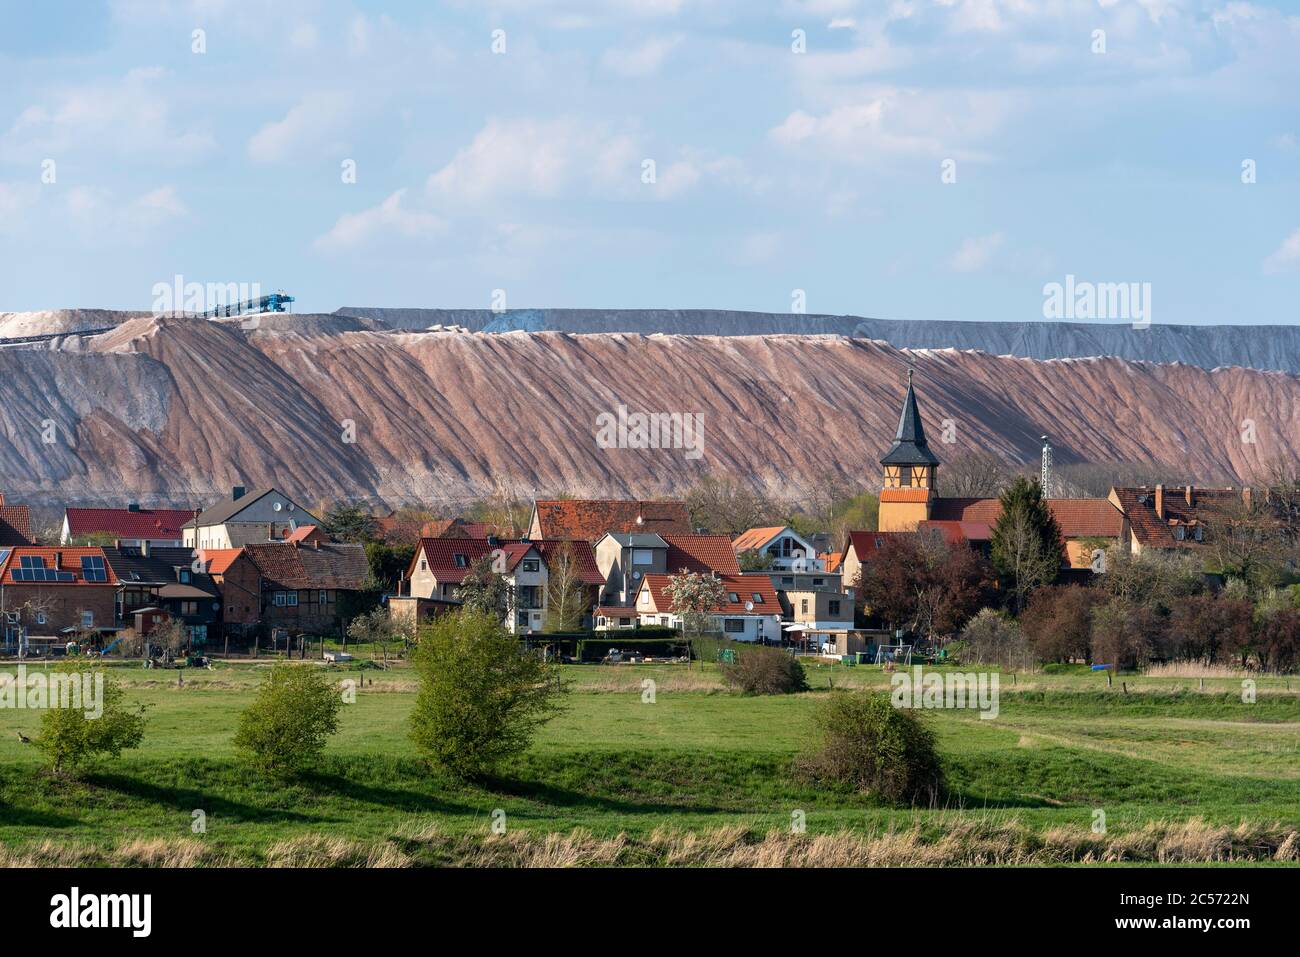 Germany, Saxony-Anhalt, view of Loitsche, the birthplace of Bill Kaulitz (Tokio Hotel). The tailings dump of the Zielitz potash plant rises behind the Stock Photo